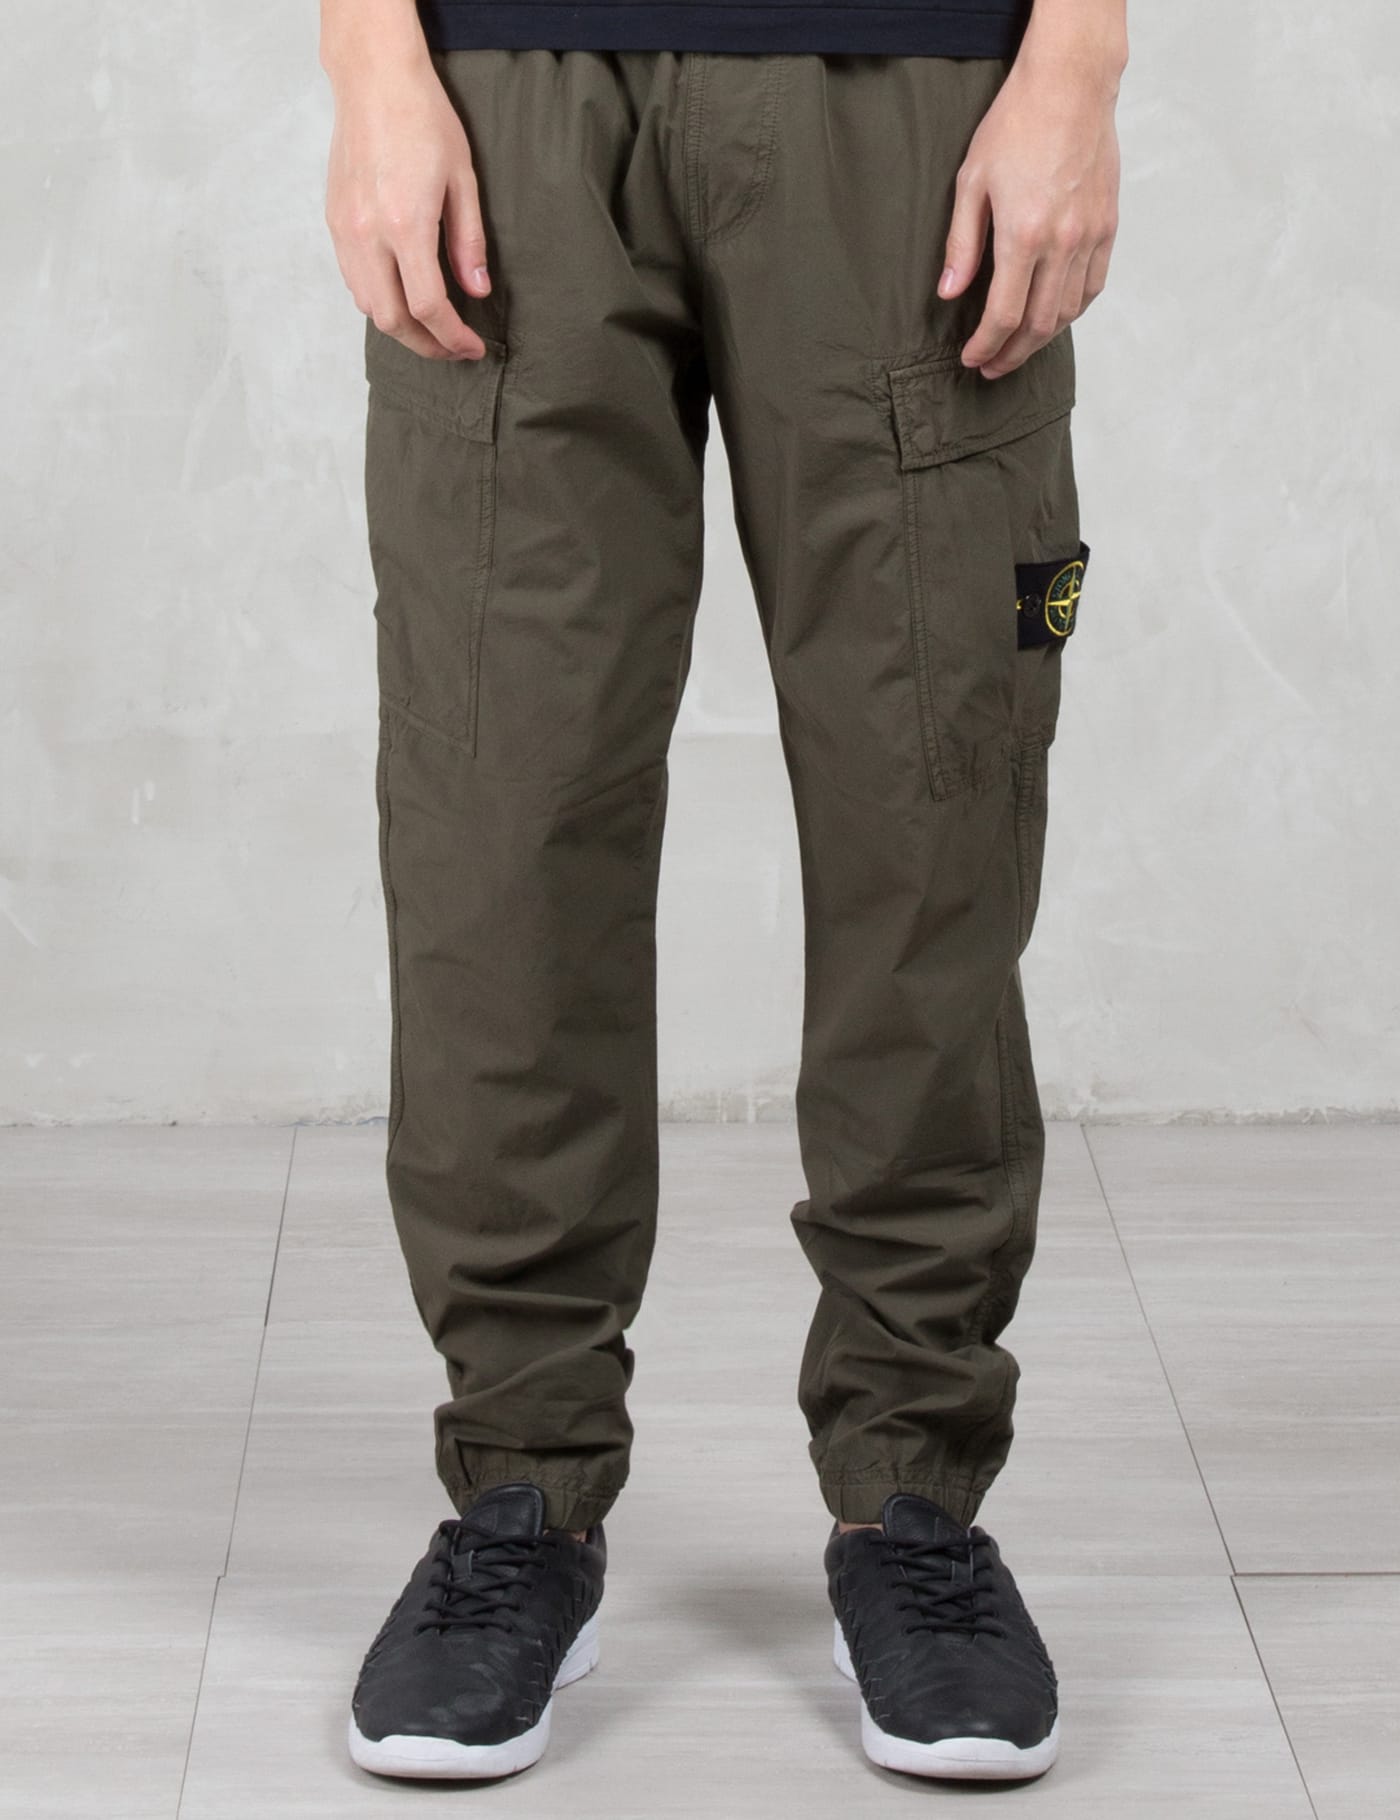 Stone Island Cargo Pants for Sale in Queens, NY - OfferUp